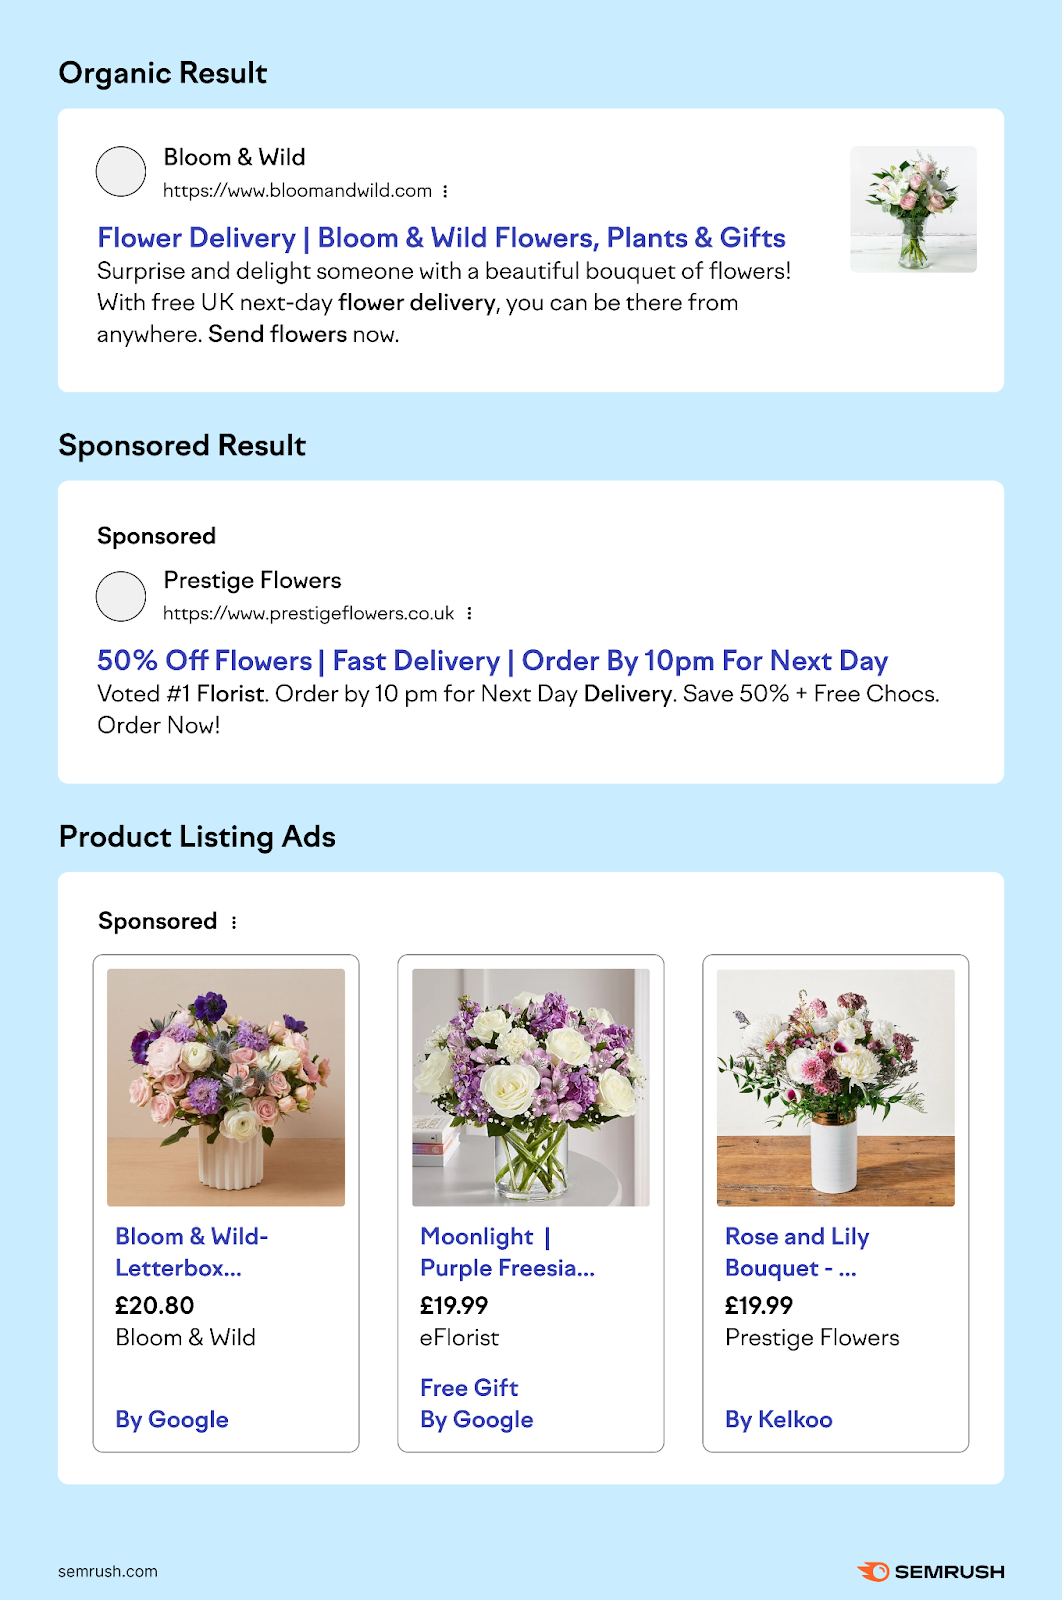 A standard organic result, a paid result with "Sponsored" written above, and PLAs with product images and prices